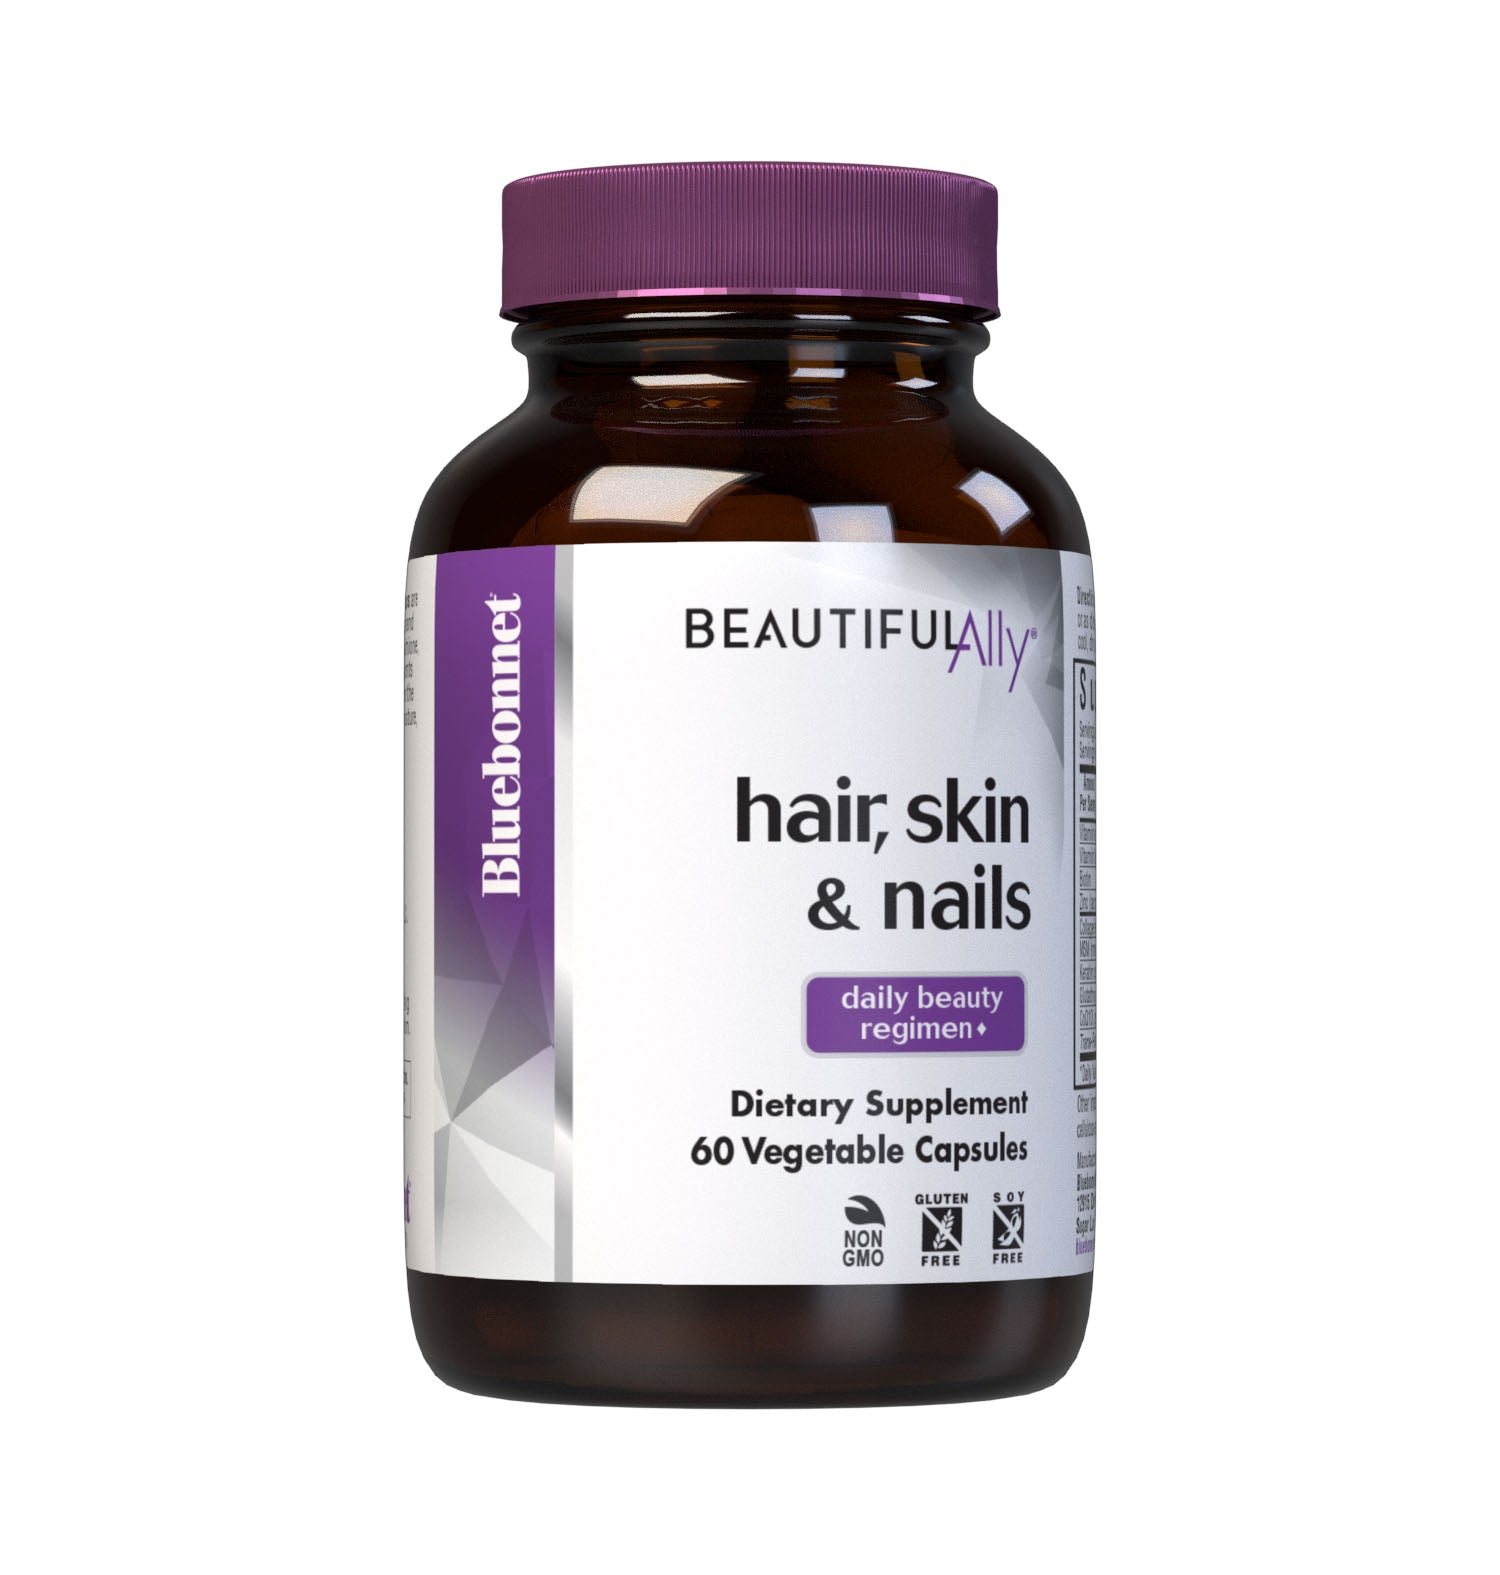 Bluebonnet’s Beautiful Ally Hair Skin & Nails 60 Vegetable Capsules are formulated to help protect, maintain and nourish hair, skin and nails daily with vitamins, minerals and other ingredients like L-glutathione, type I & III collagen peptides, keratin, and MSM. These nutrients provide the body with the building blocks necessary to help improve the strength and appearance of hair and nails while supporting skin moisture, elasticity, and radiance from the inside out.  #size_60 count